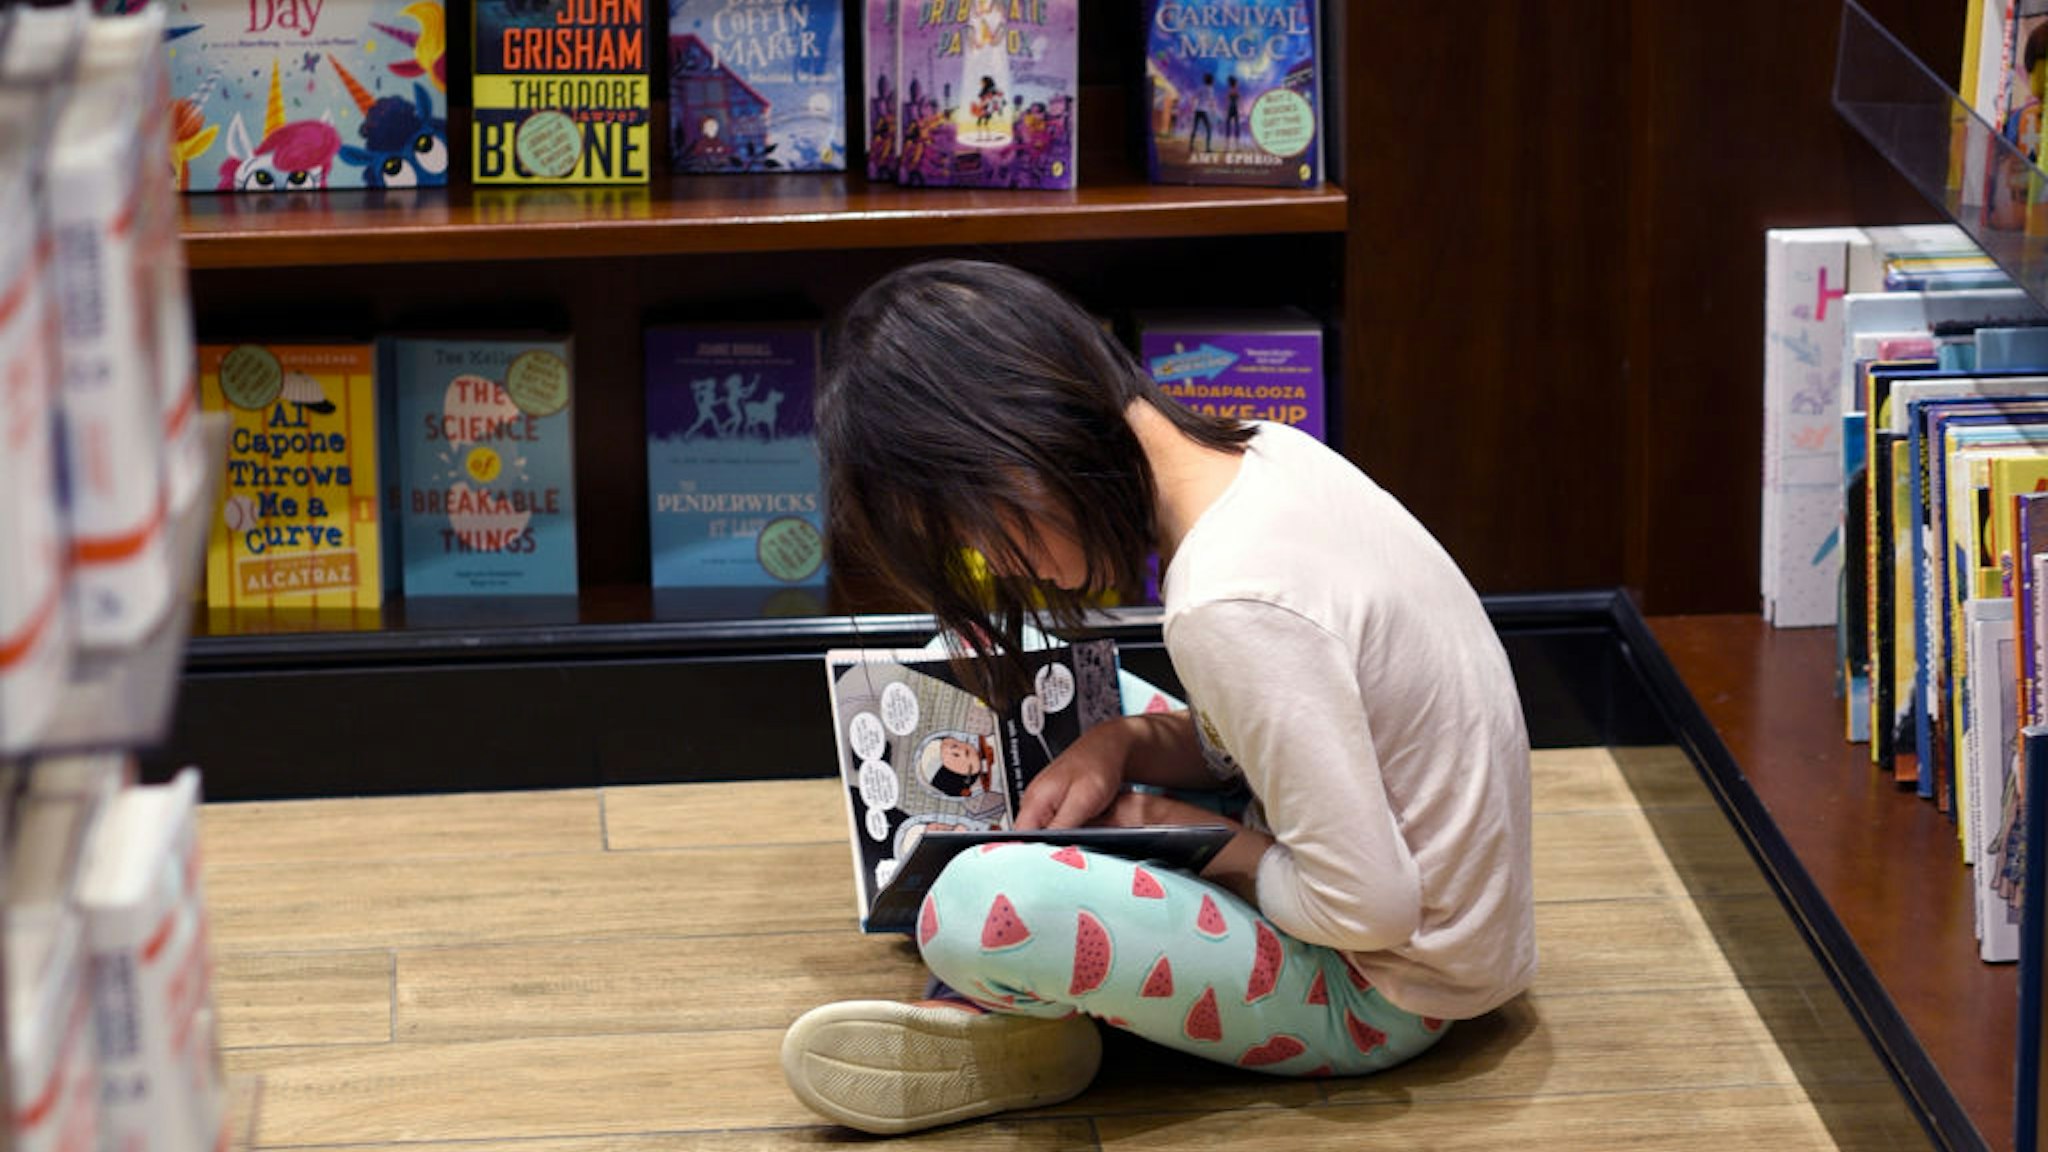 DENVER, COLORADO - JUNE 20, 2019: A young girl sits on the floor and reads as her mother shops in a bookstore located in the terminal at Denver International Airport in Denver, Colorado. (Photo by Robert Alexander/Getty Images)